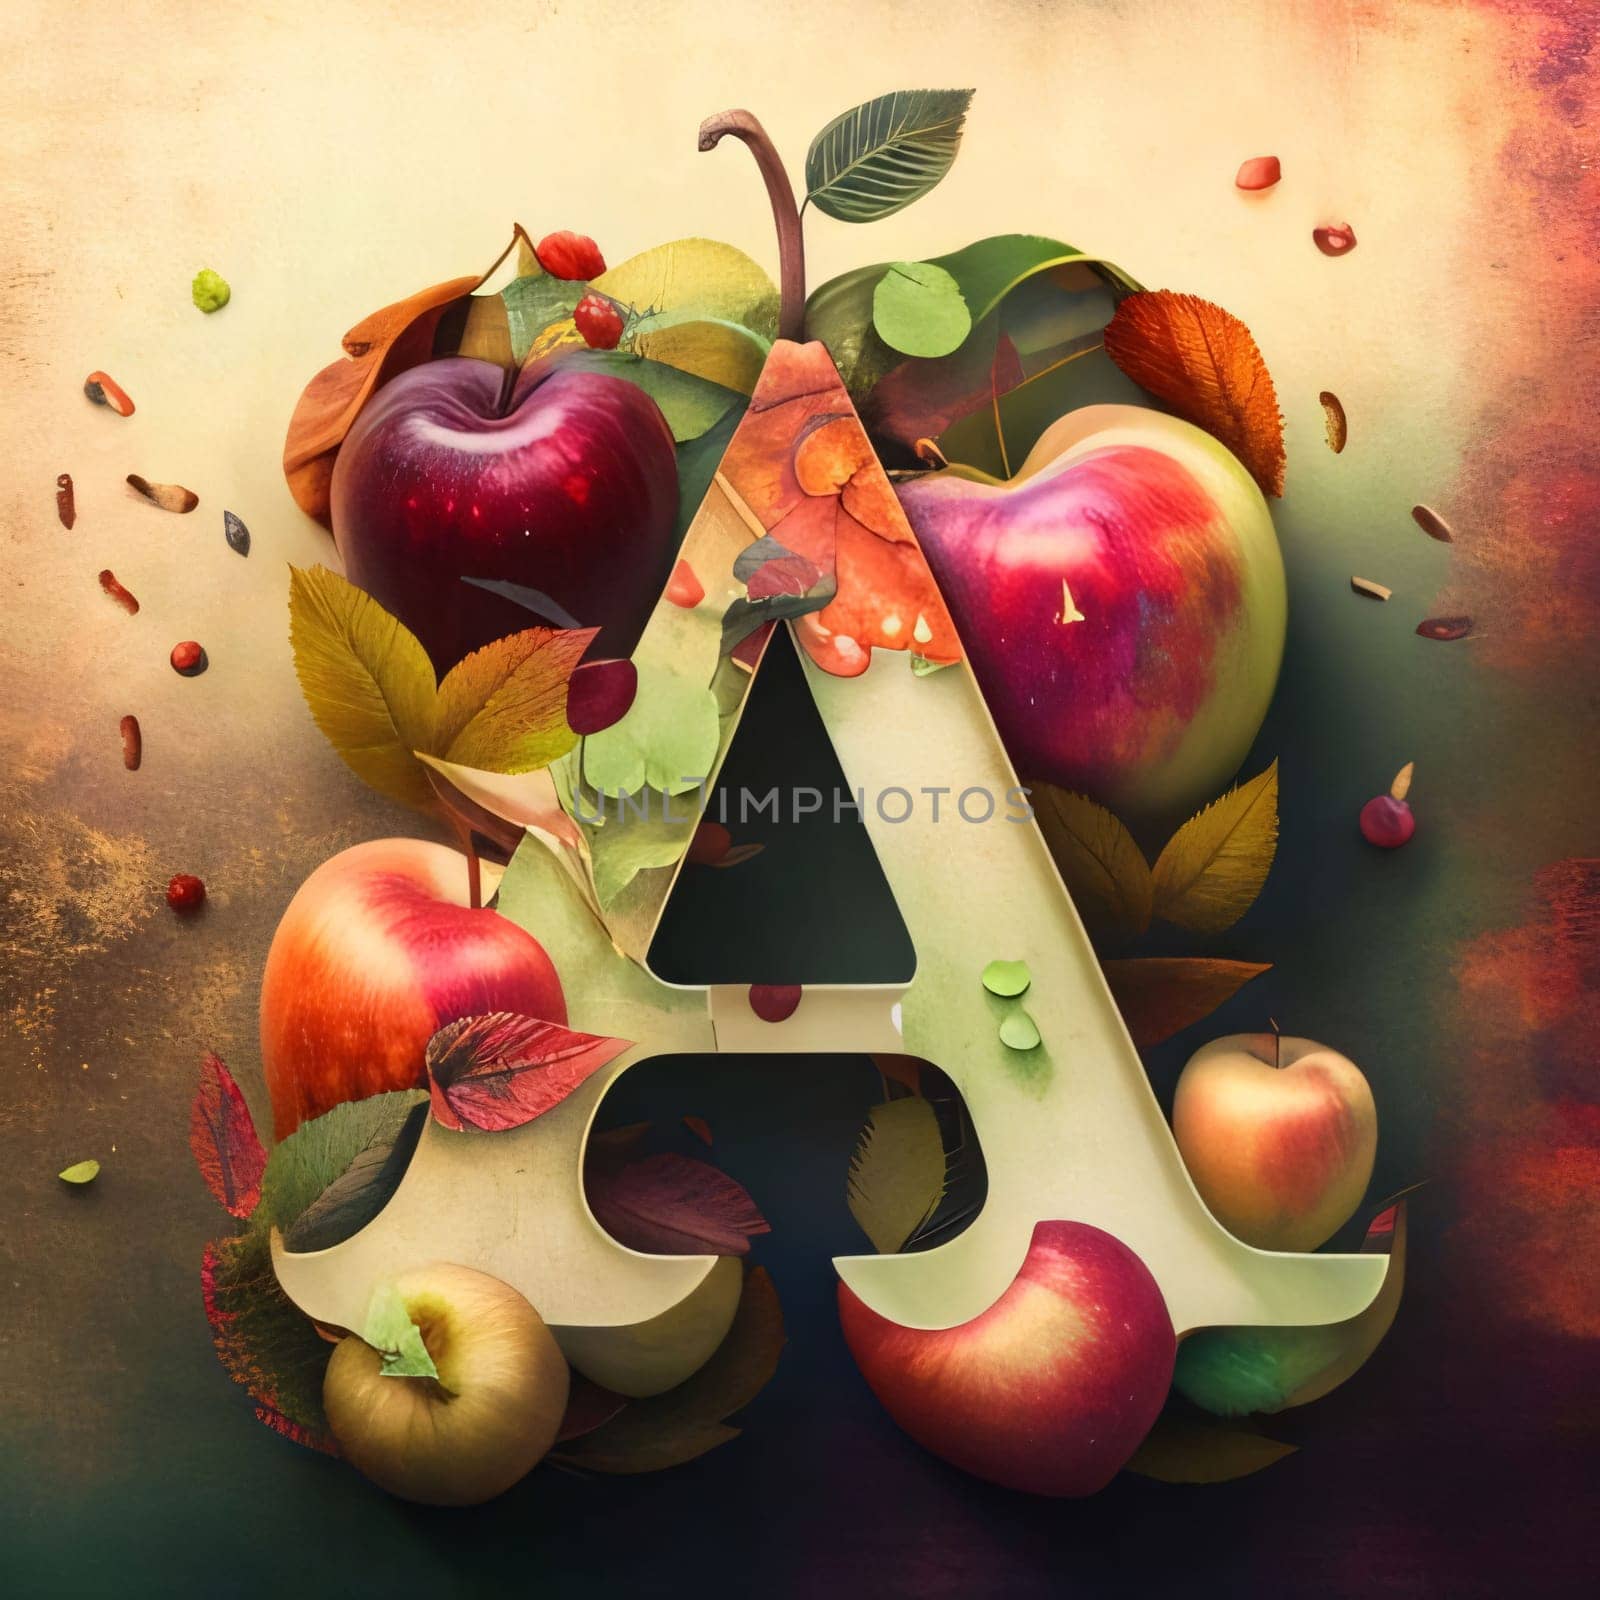 Graphic alphabet letters: Letter A made of autumn leaves, apples and berries on grunge background